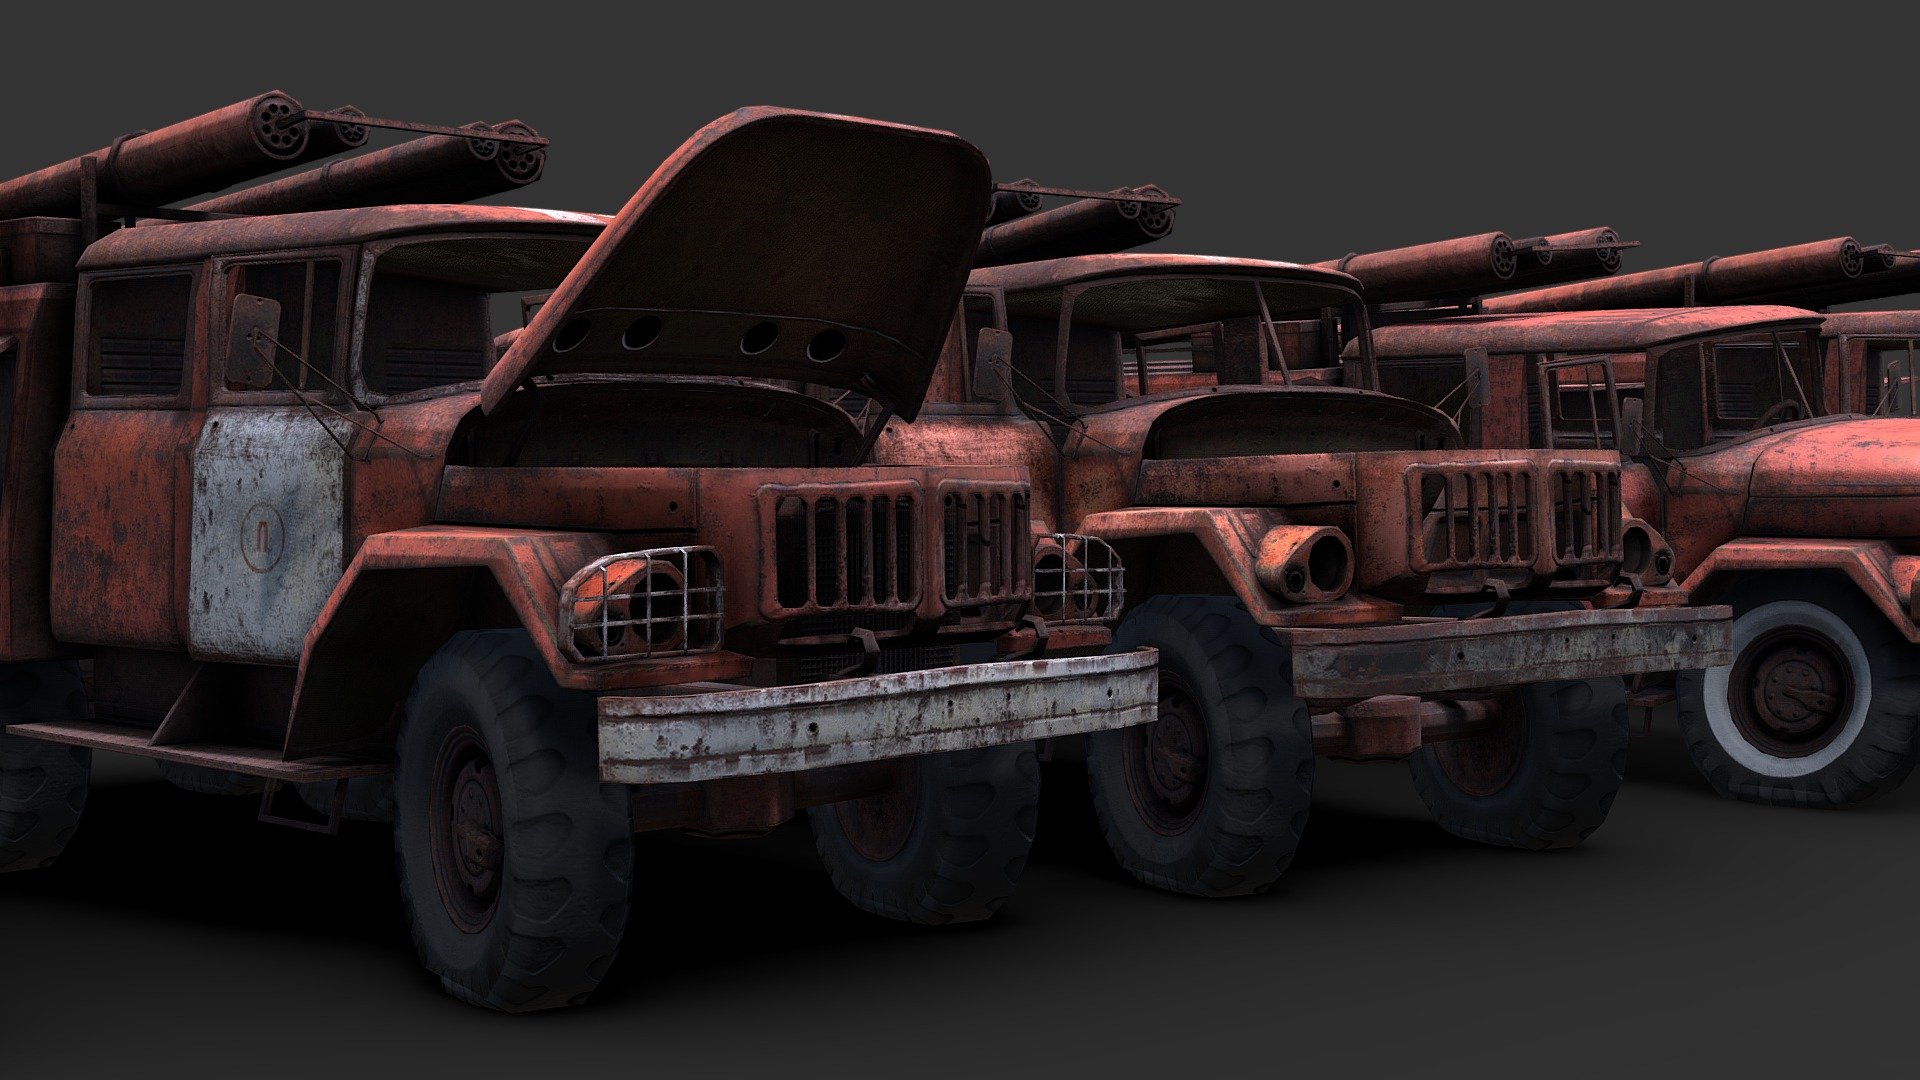 A set of fire-fighting vehicles that were left to sit after being heavily contaminated during the Chernobyl Disaster in April of 1986. I wound up giving them quite a lot of variations to keep them from &ldquo;repeating